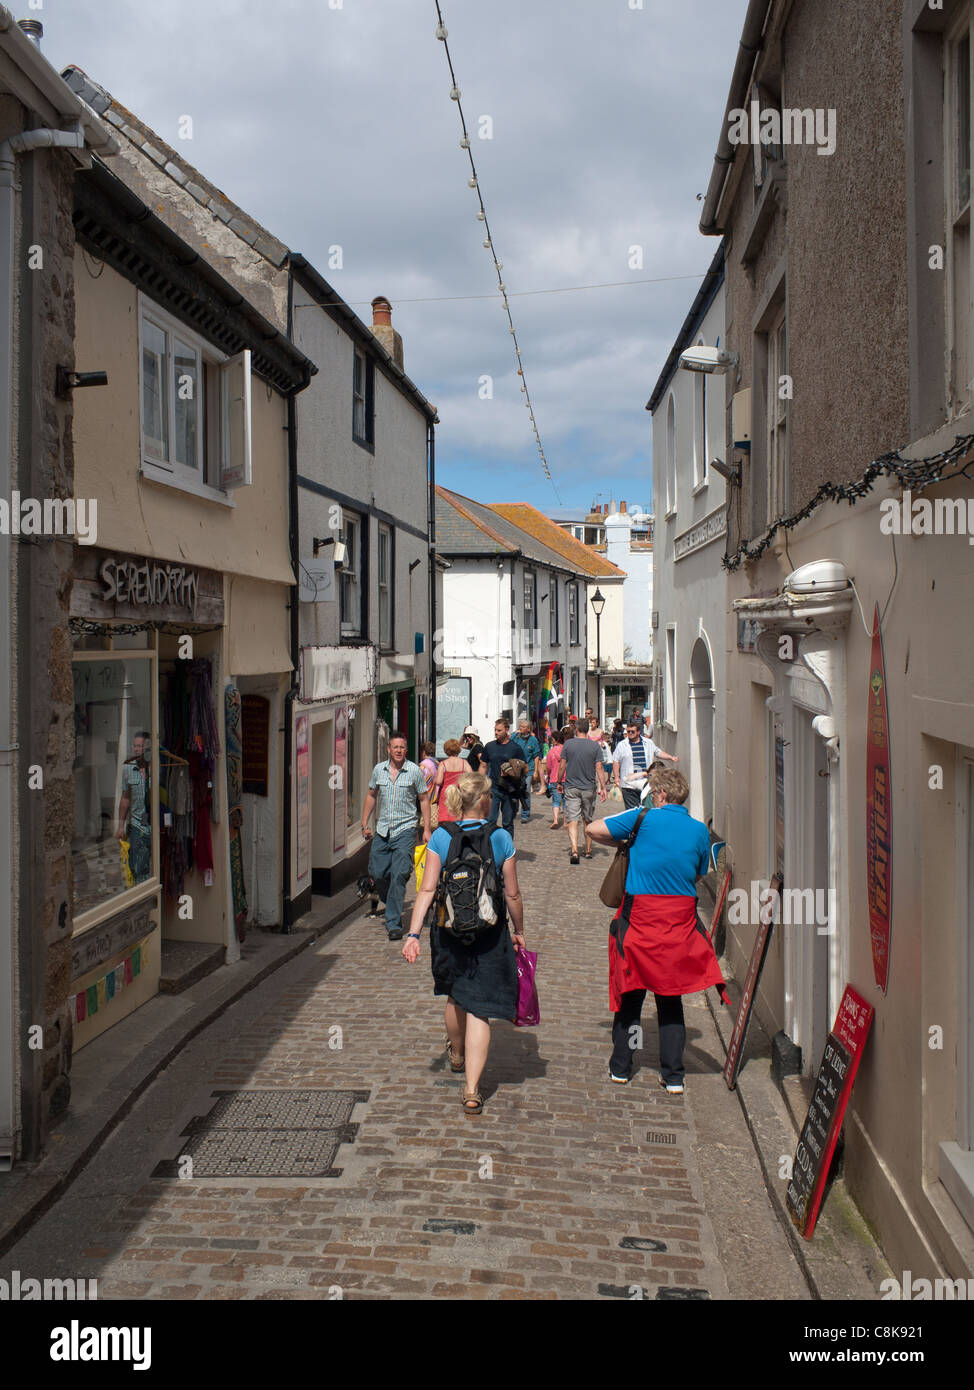 Fore Street in St. Ives, a narrow cobblestone street with shops on both sides. Stock Photo